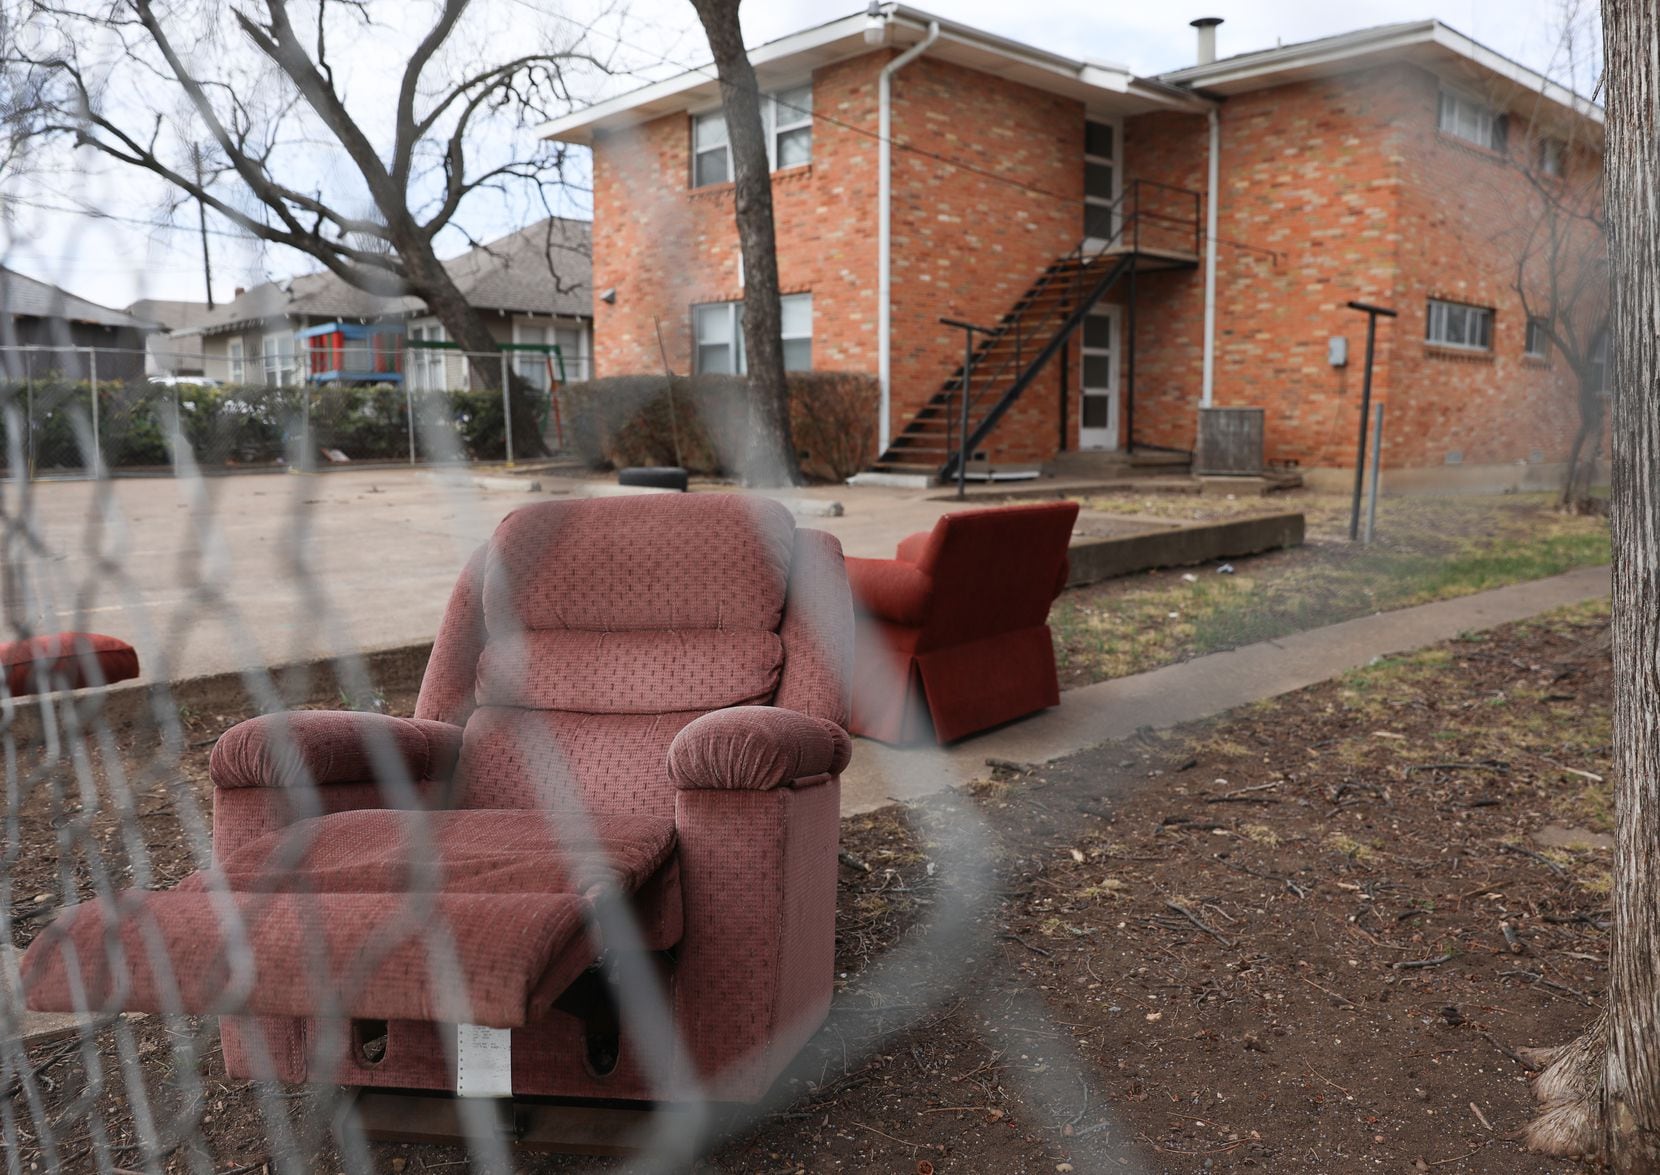 Some breaks on the fence along West Eighth Street between Llewellyn and Adams were offered ...